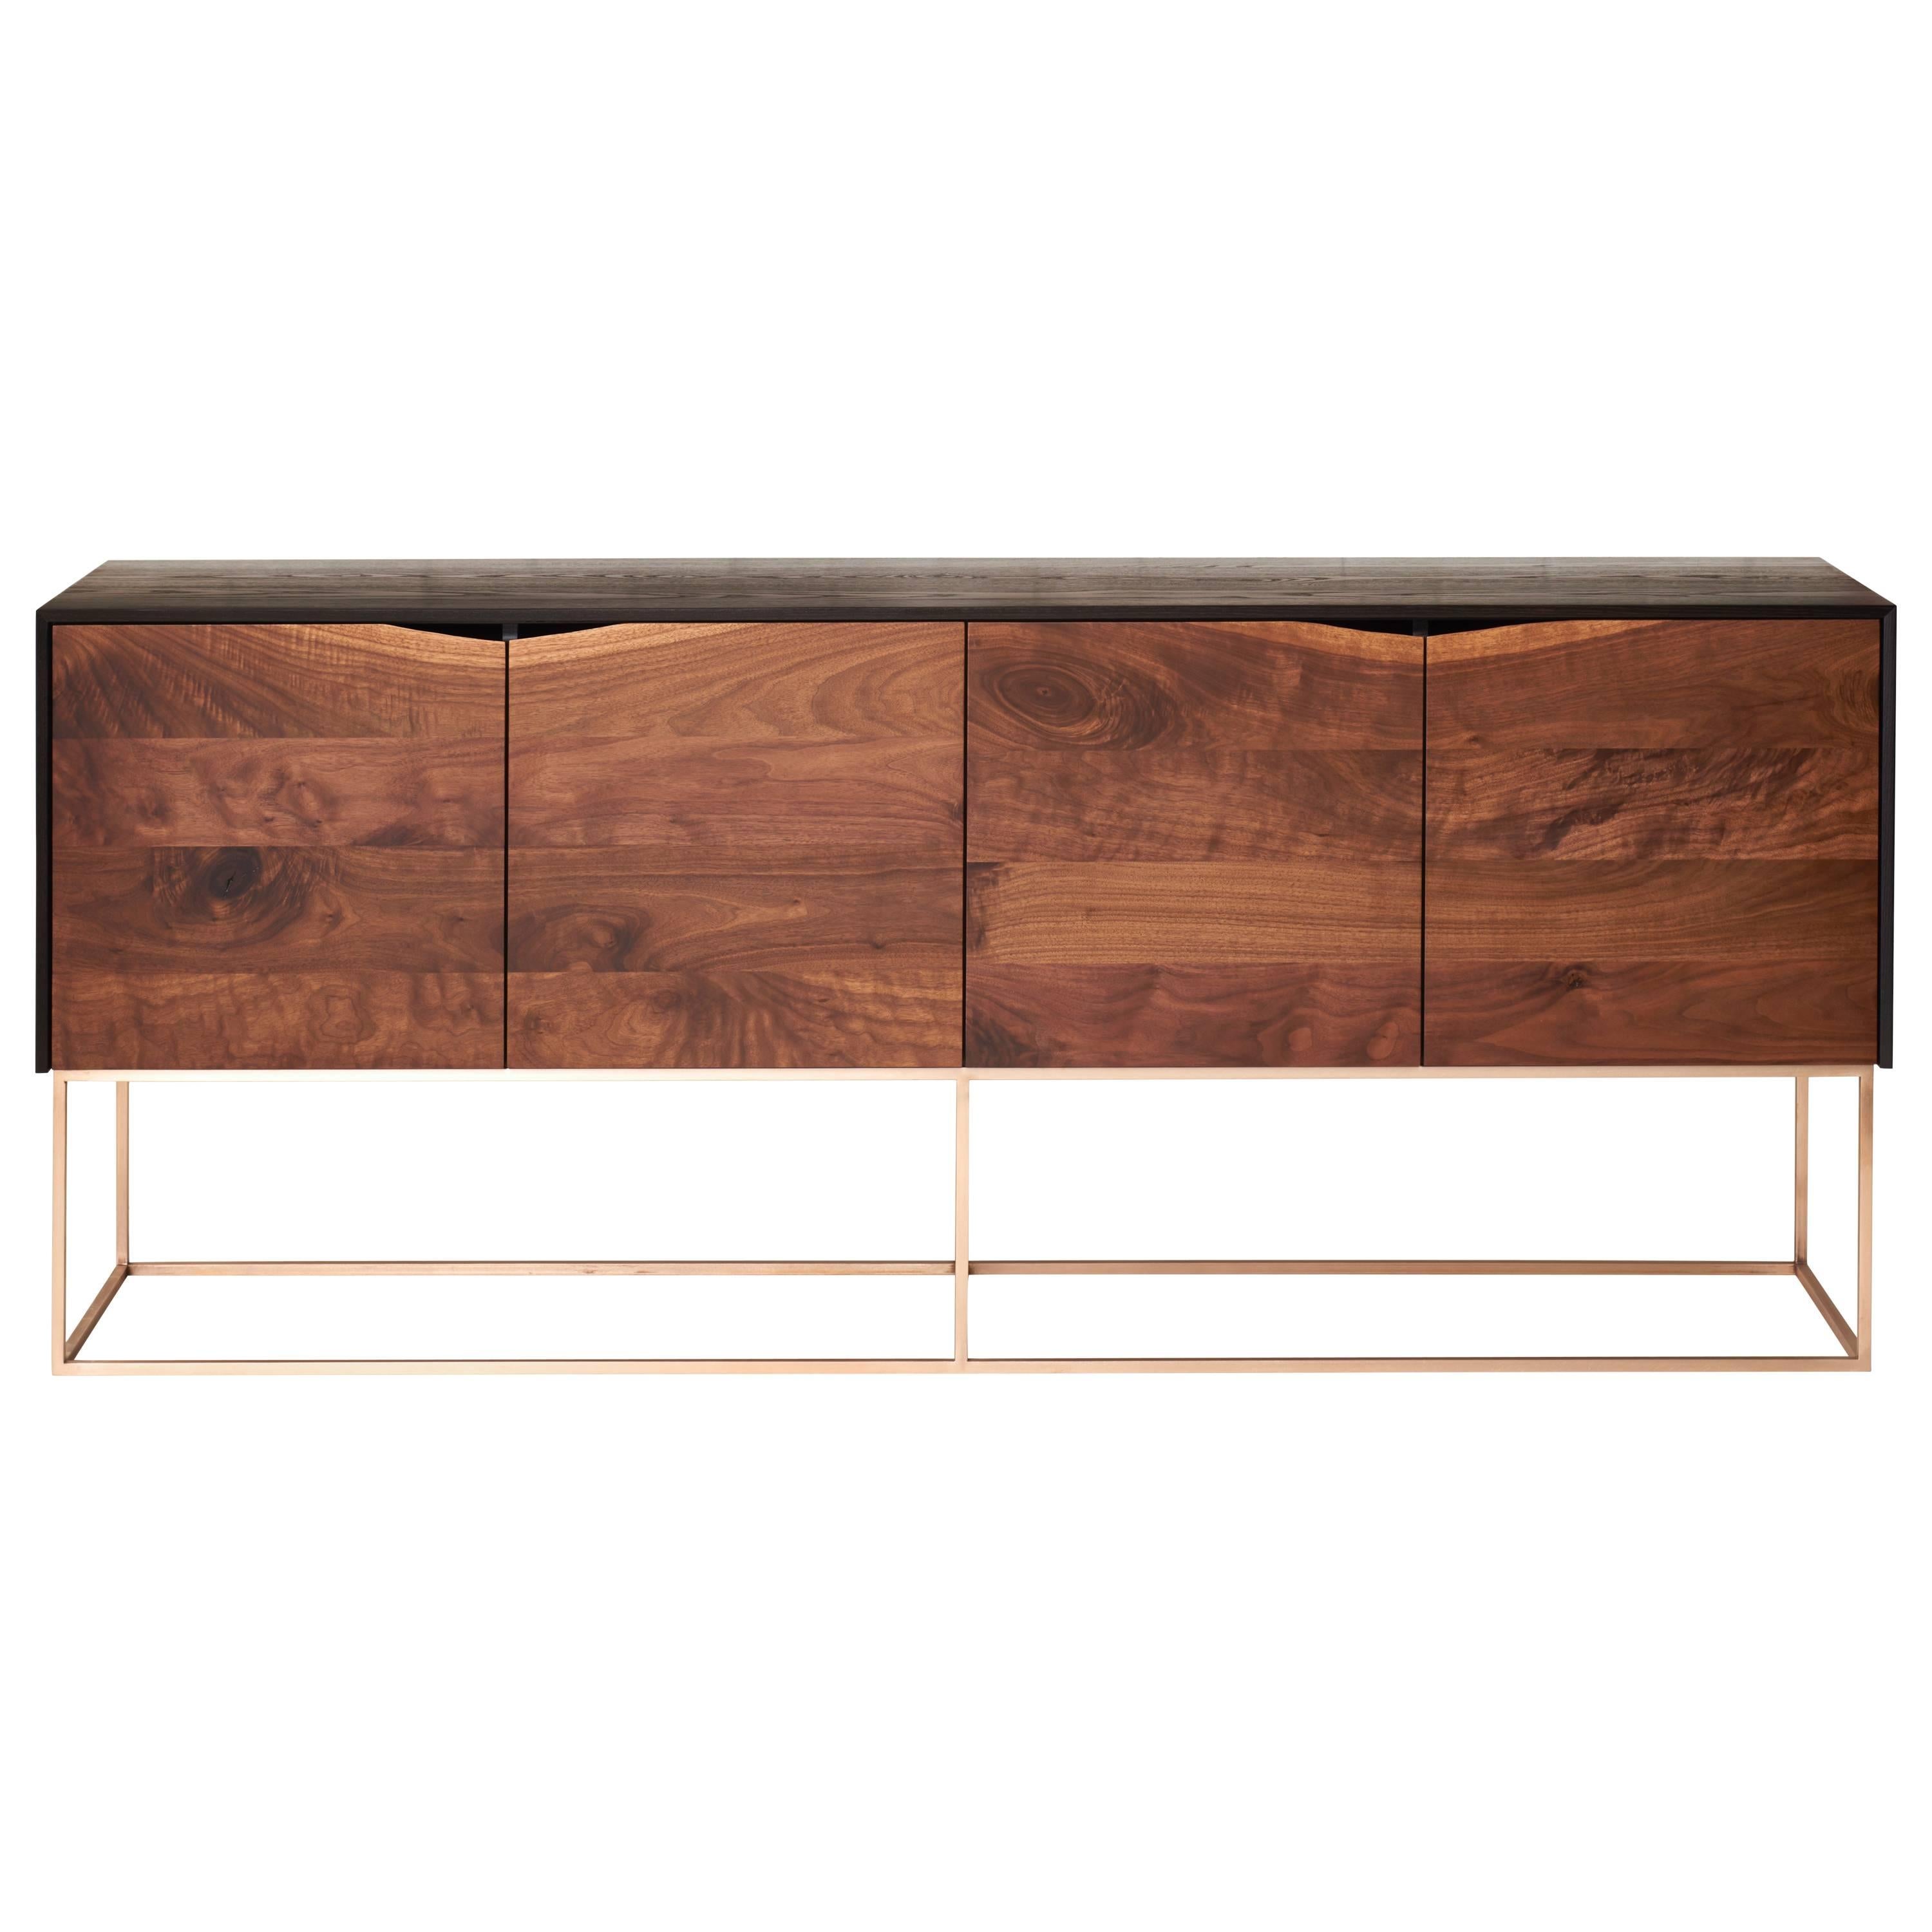 Rustic Modern Credenza, Handcrafted of American Hardwoods with a Bronze Base